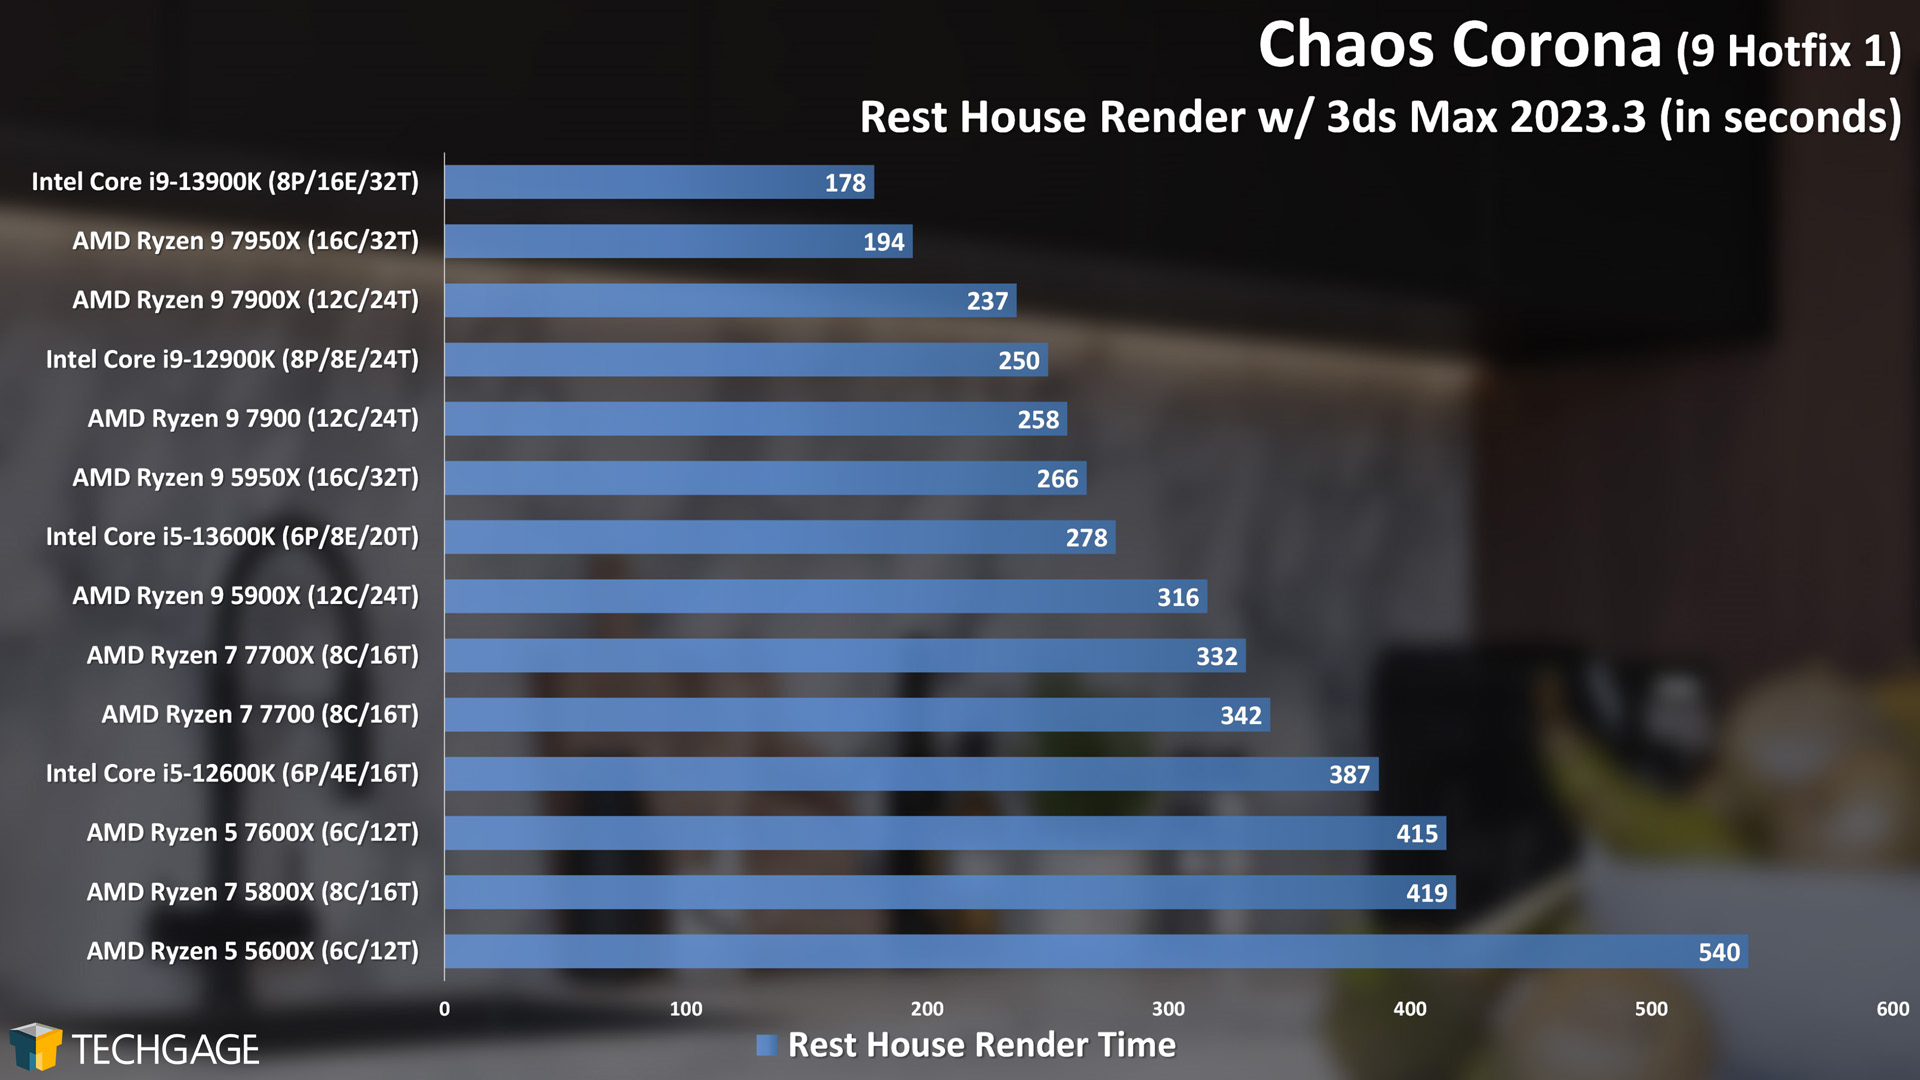 Chaos Corona - CPU Rendering Performance (Rest House)